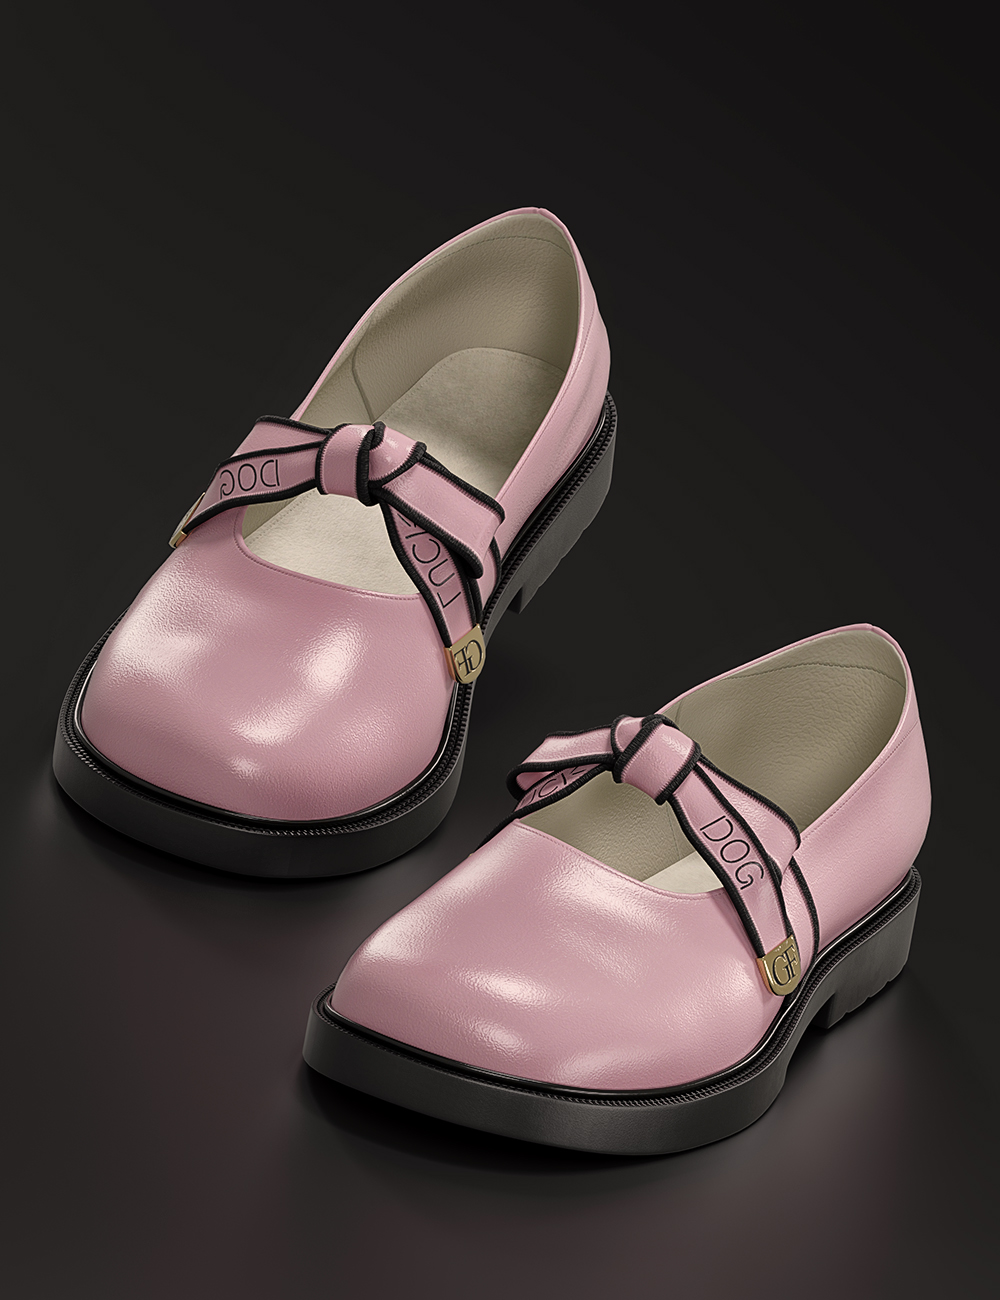 Rainy Koo Socks and Shoes for Genesis 8 and 8.1 Females by: Green Finger, 3D Models by Daz 3D